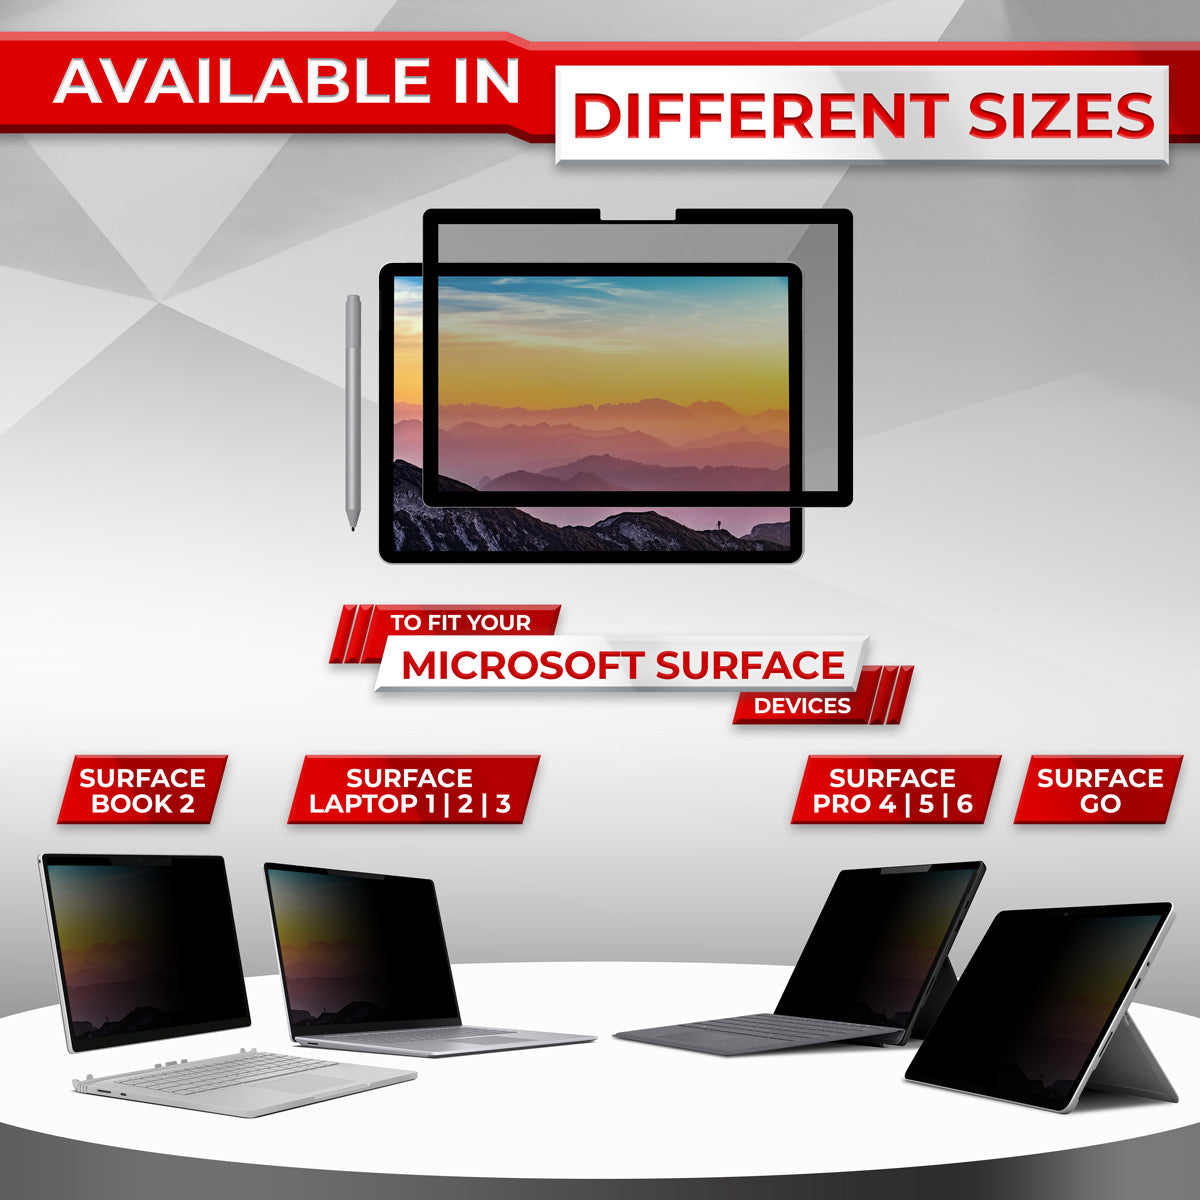 SightPro Magnetic Privacy Screen for Surface Book 2 15"